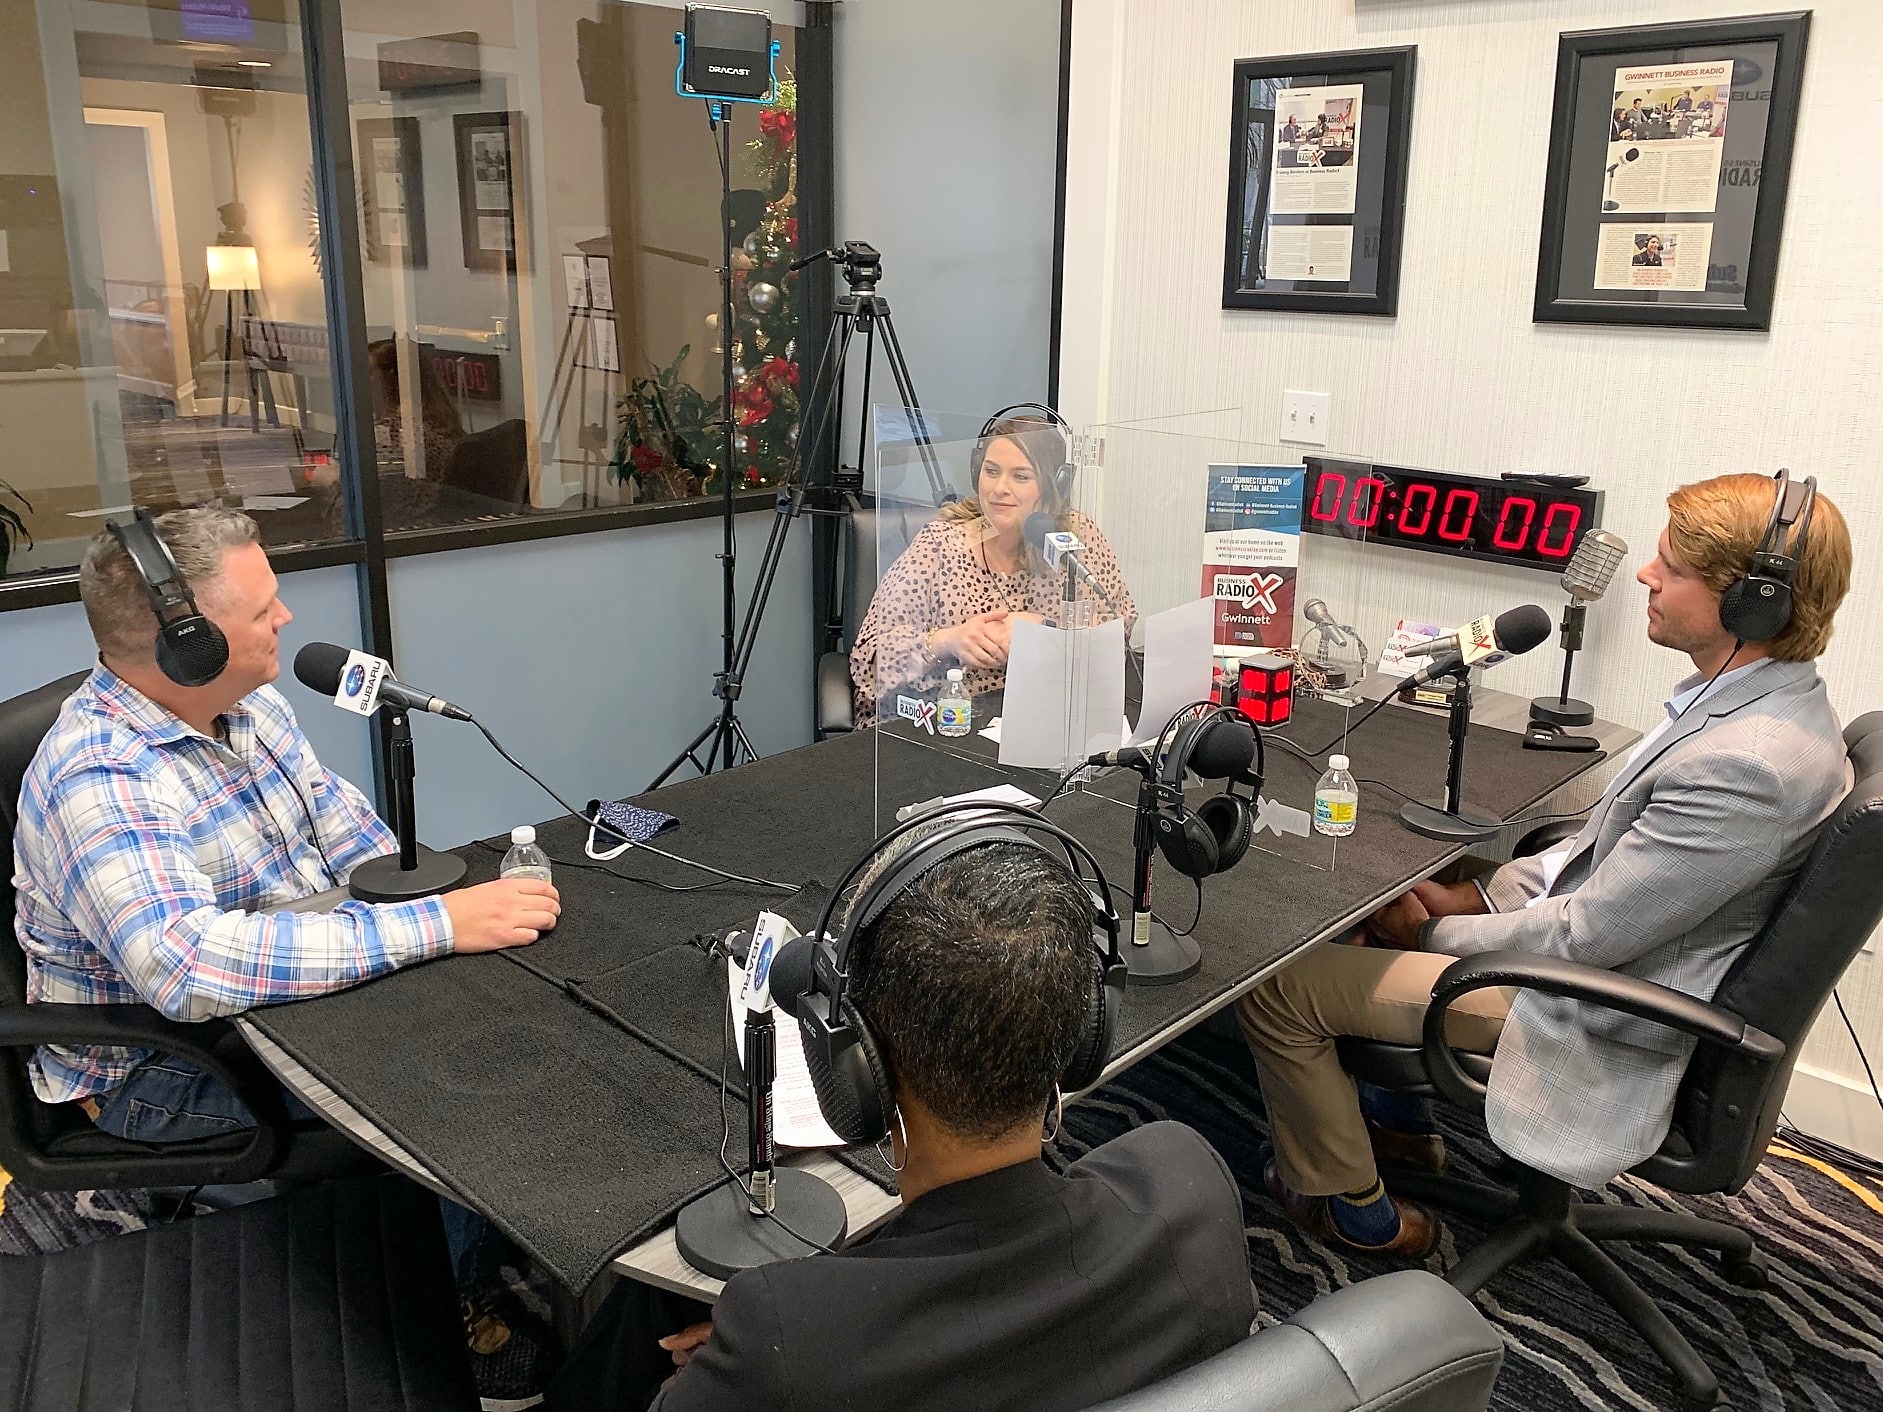 2020 Small Business Awards winners featured on Business RadioX